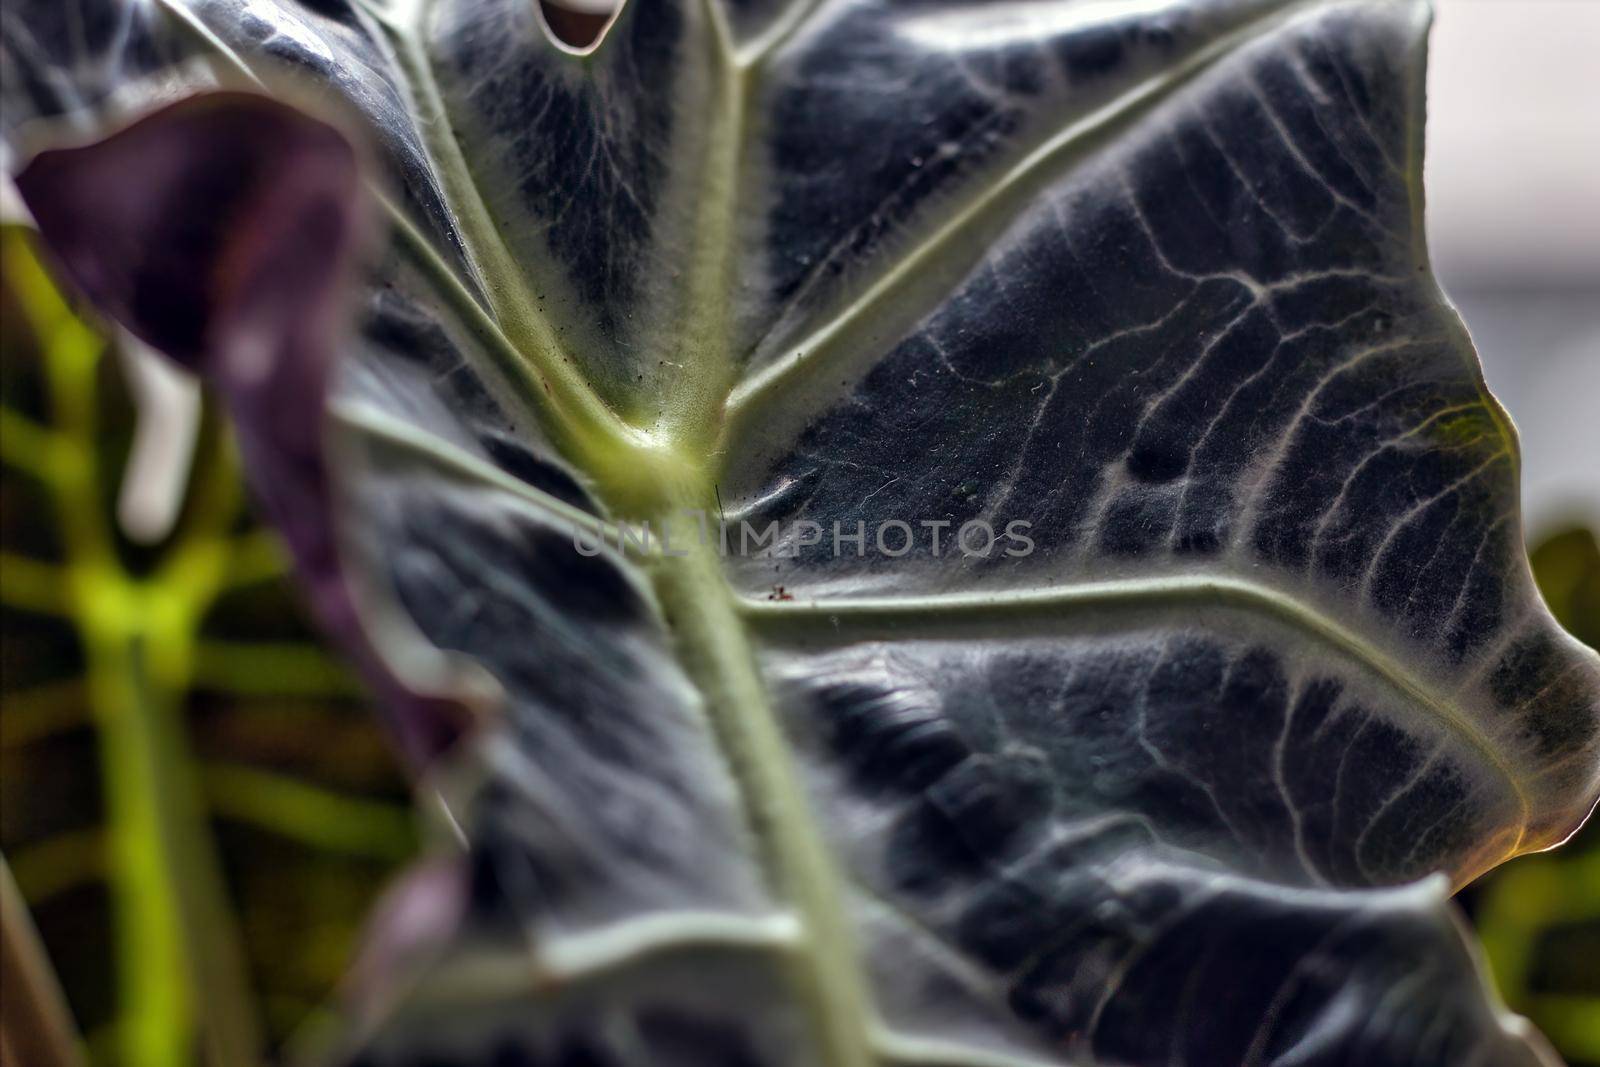 Abstract background shot showing leaf of Alocasia plant, it is a genus of broad-leaved rhizomatous or tuberous perennial flowering plants from the family Araceae. by arpanbhatia